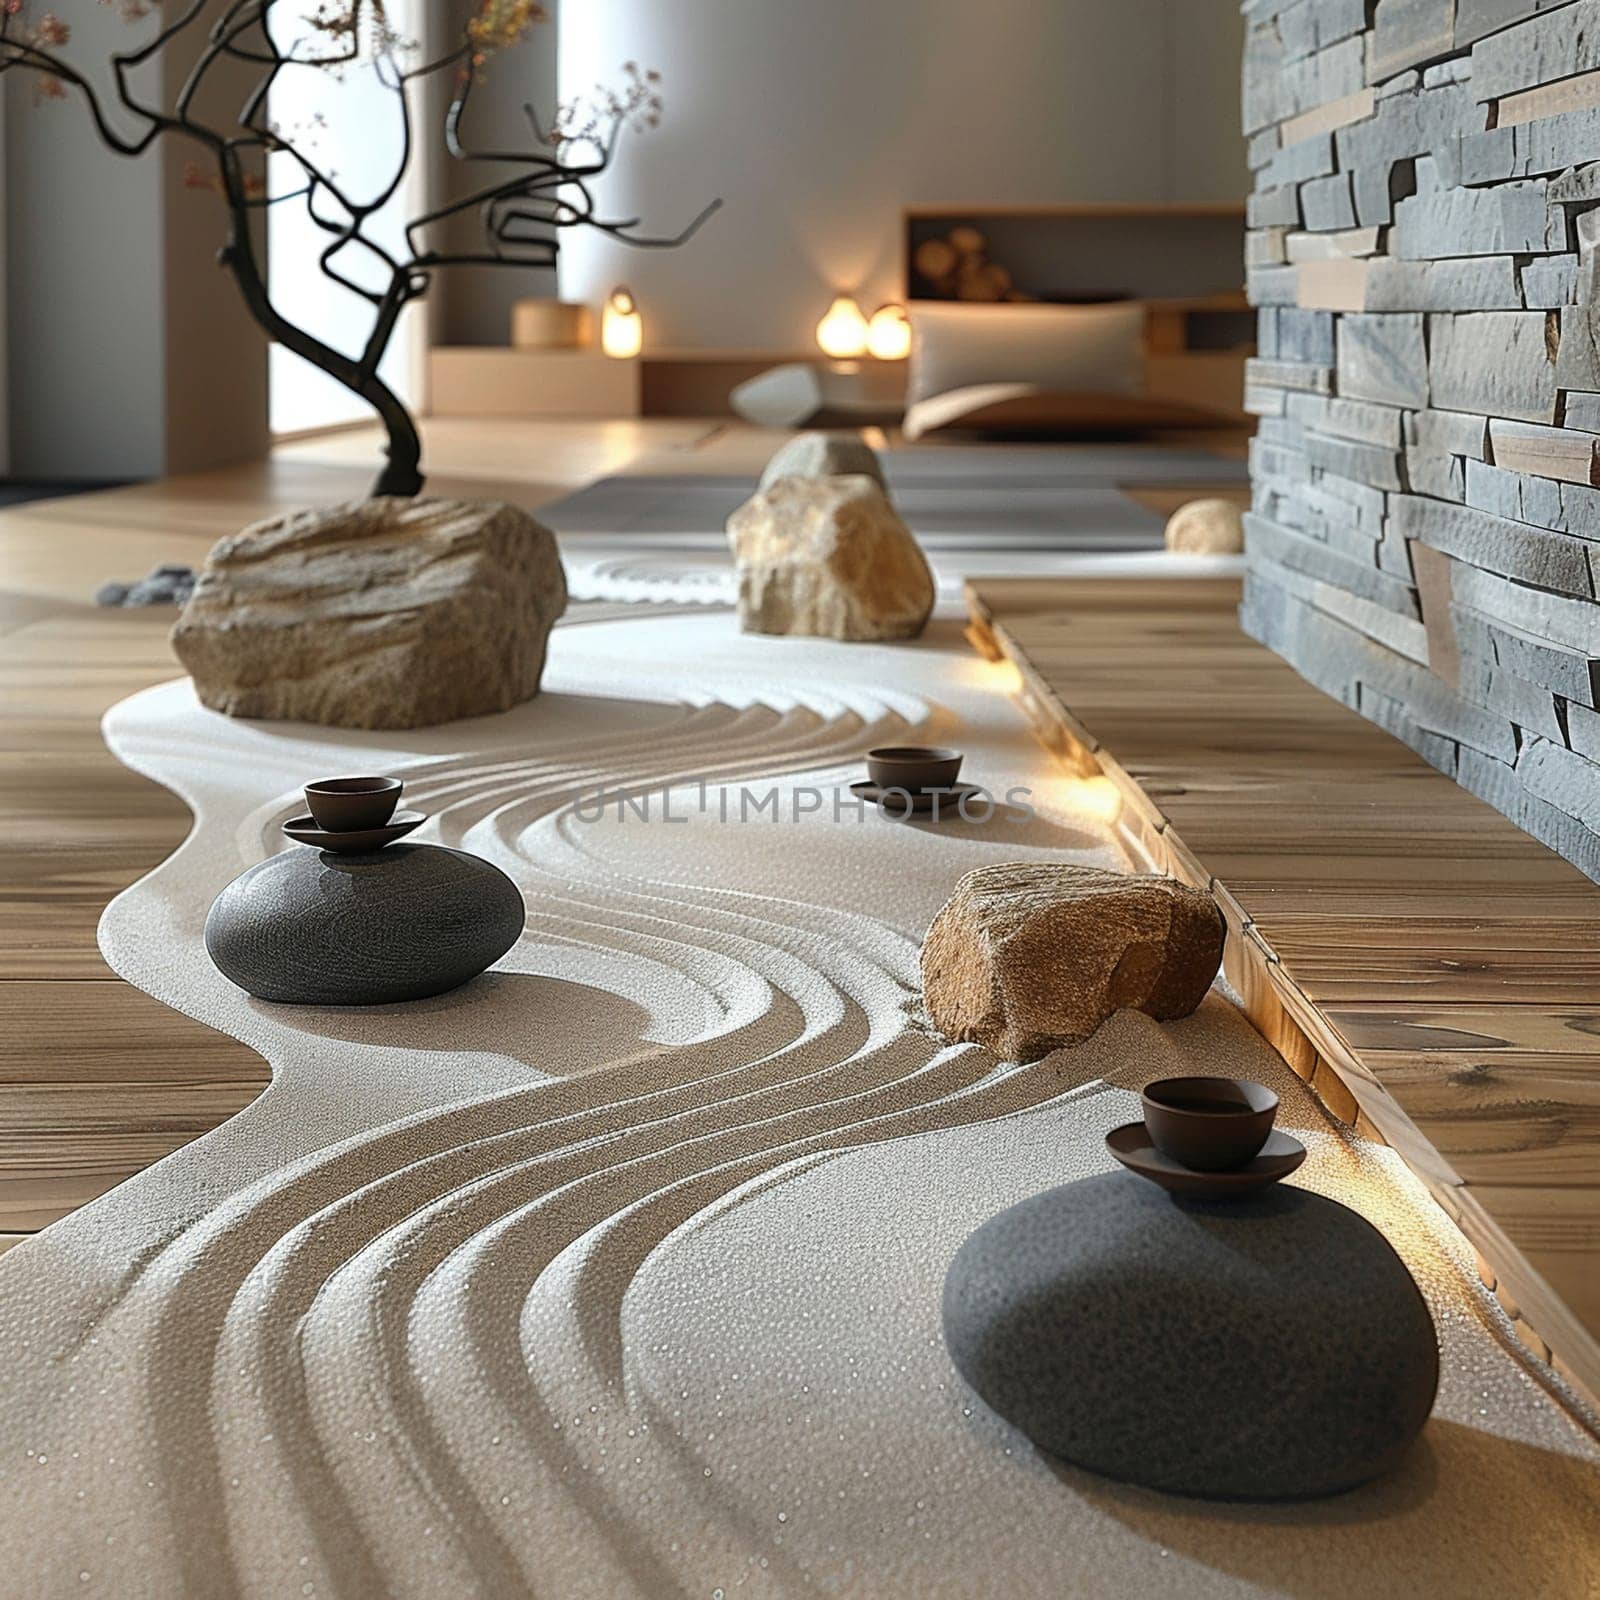 Minimalist Zen garden with raked sand and simple, natural elements